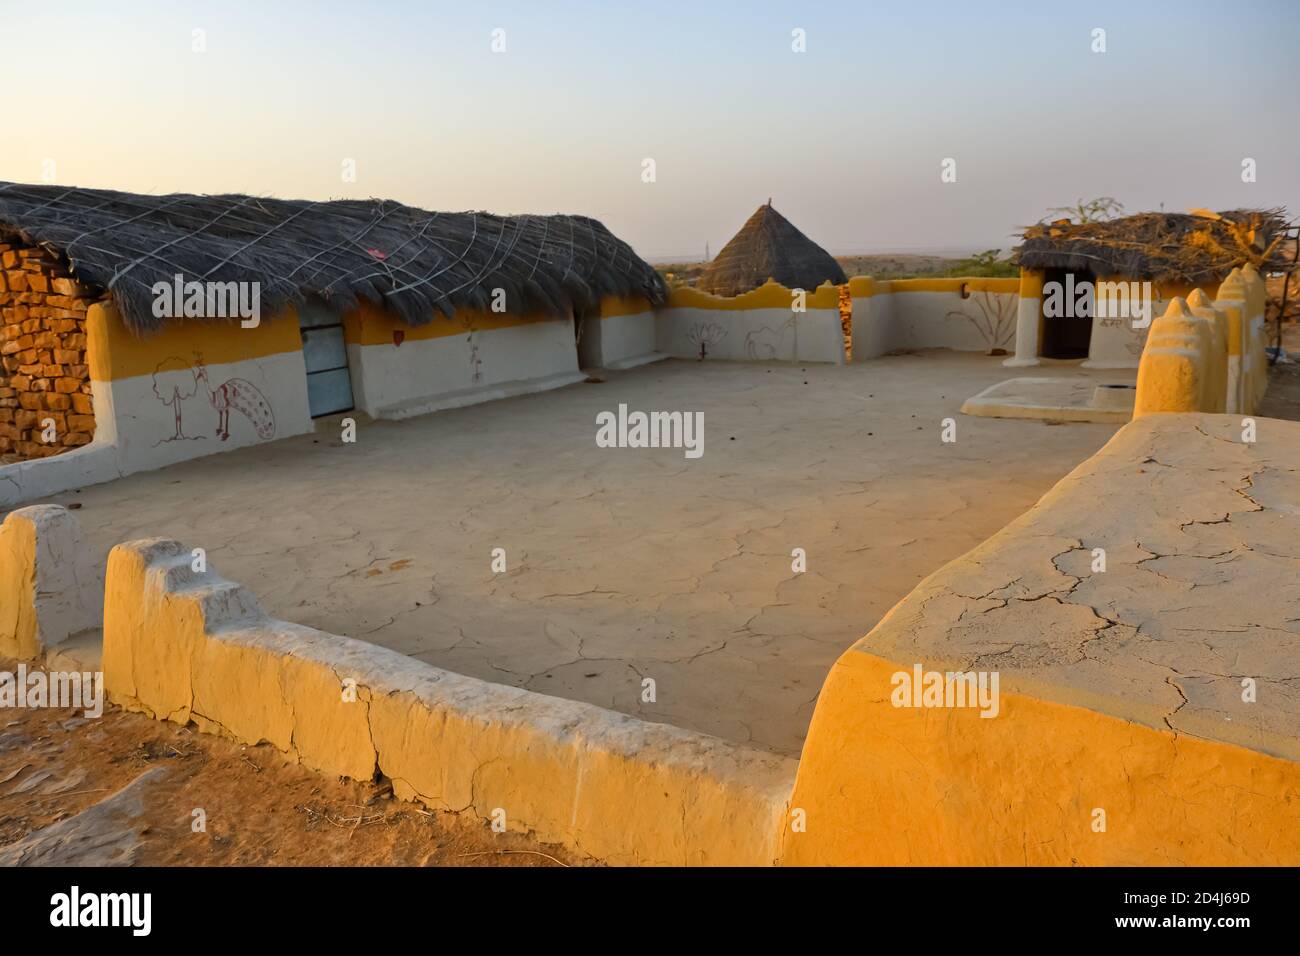 A selective focus image of a mud house with thatched roof in an village in Rajasthan India Stock Photo